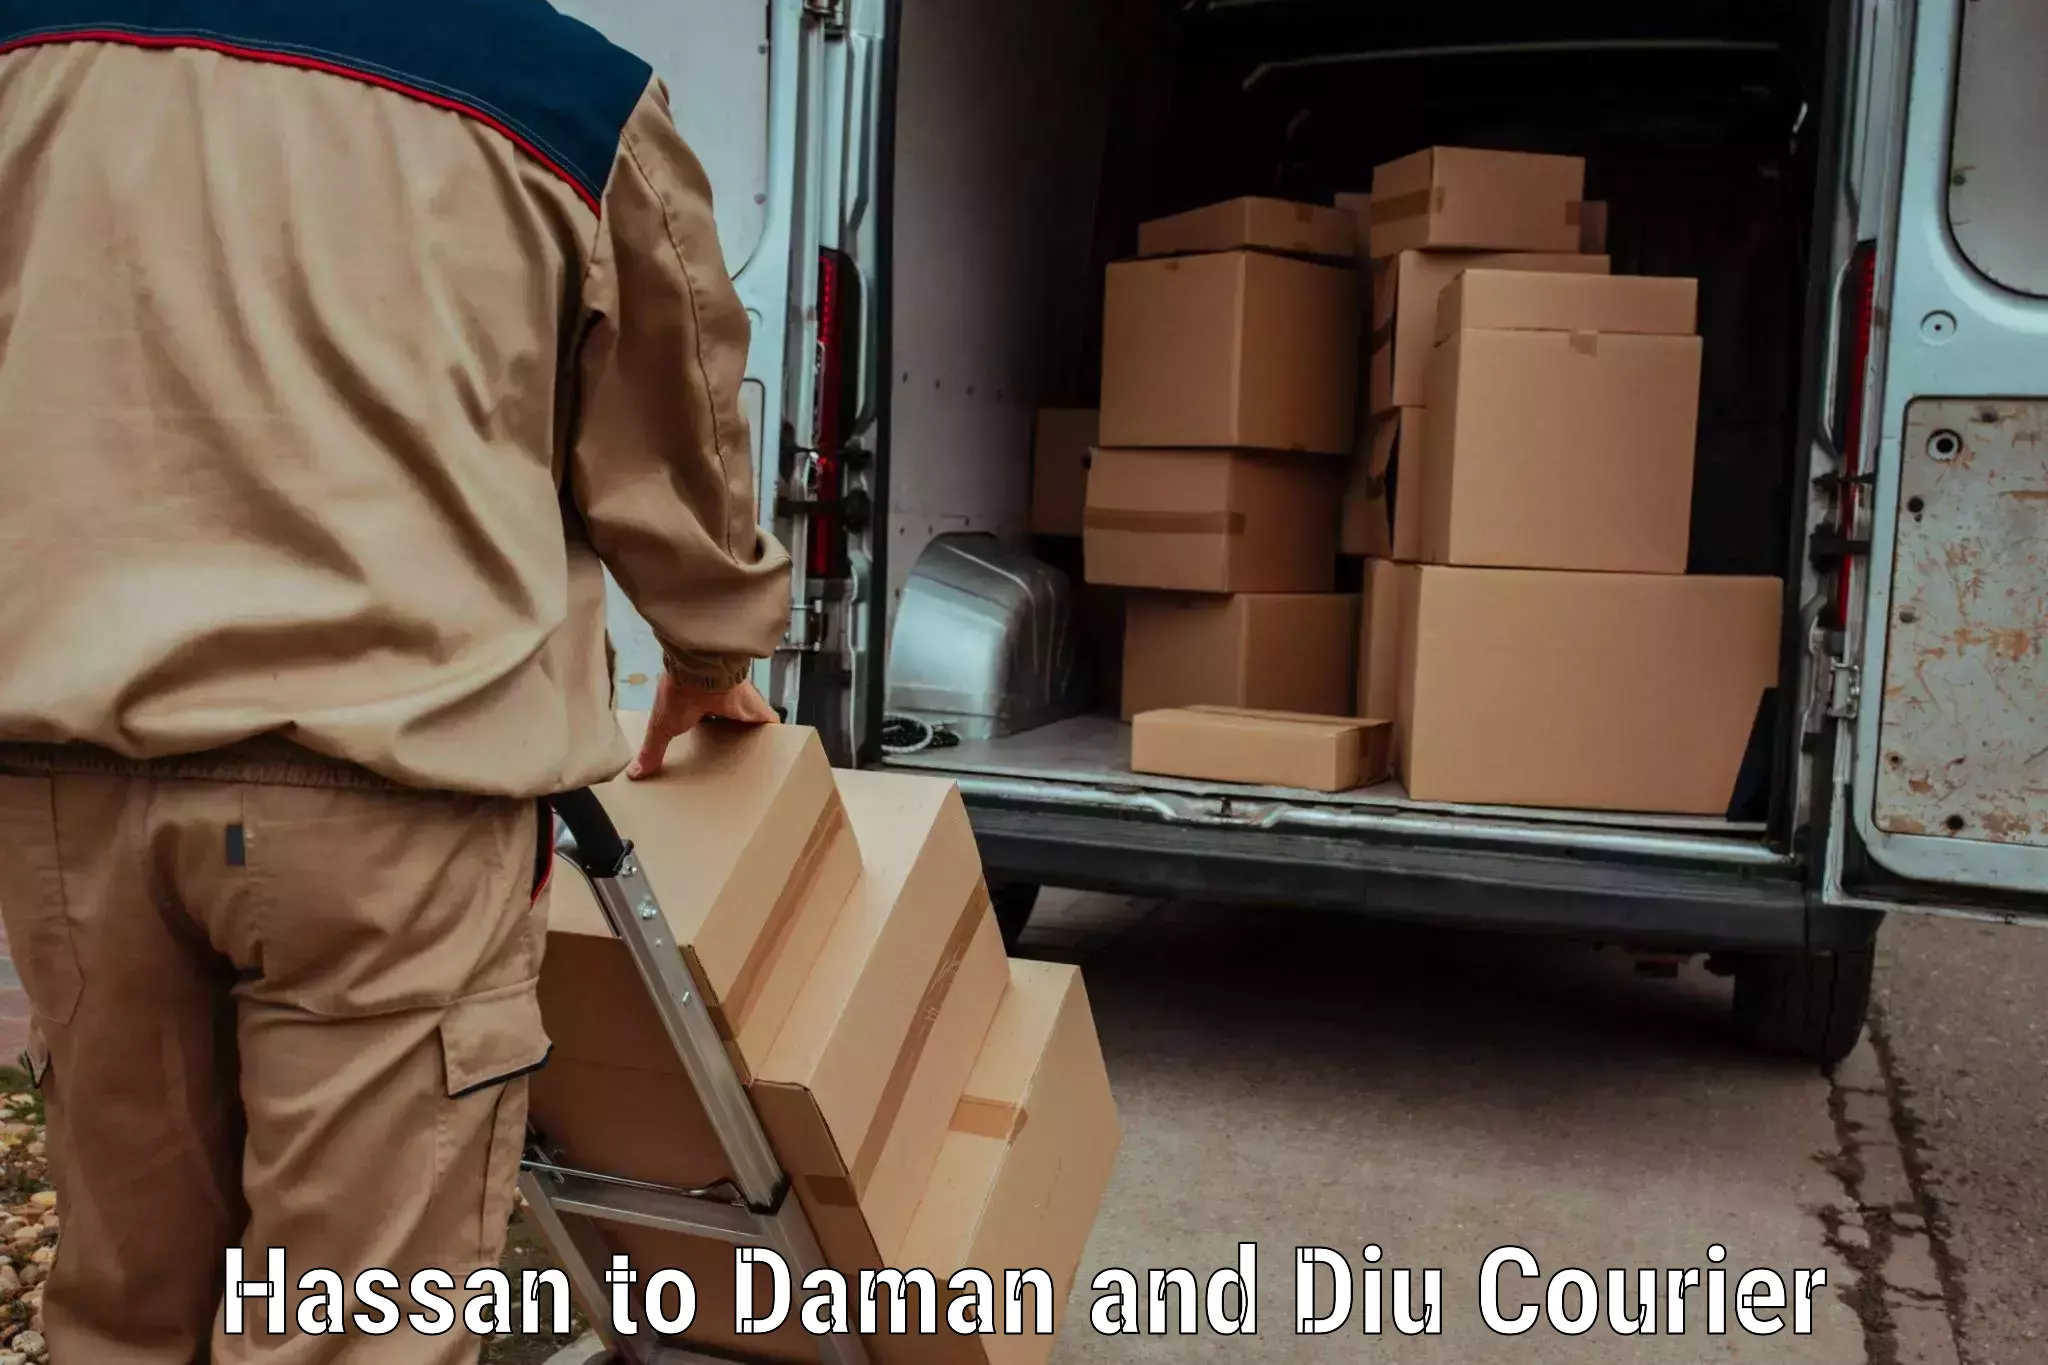 Customer-focused courier Hassan to Daman and Diu